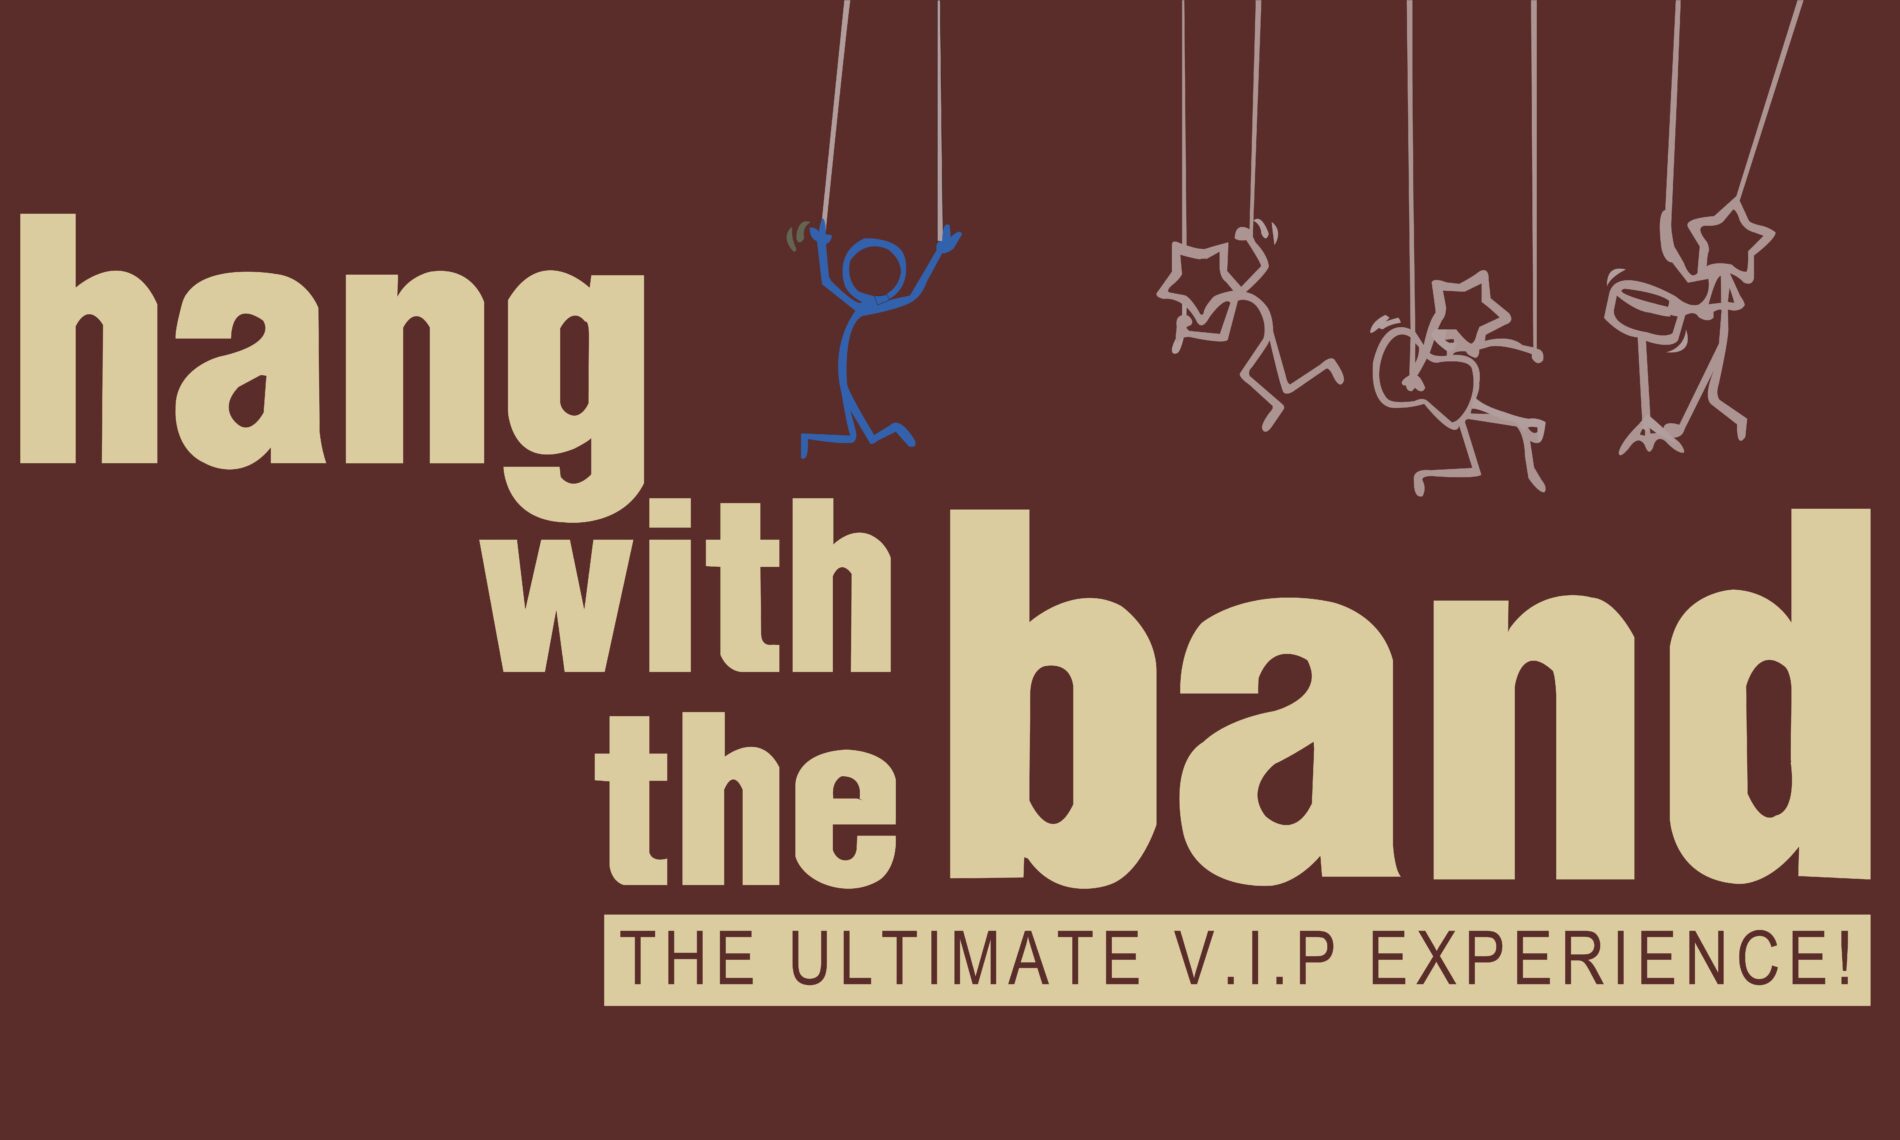 Hang with the band - the ultimate V.I.P experience!